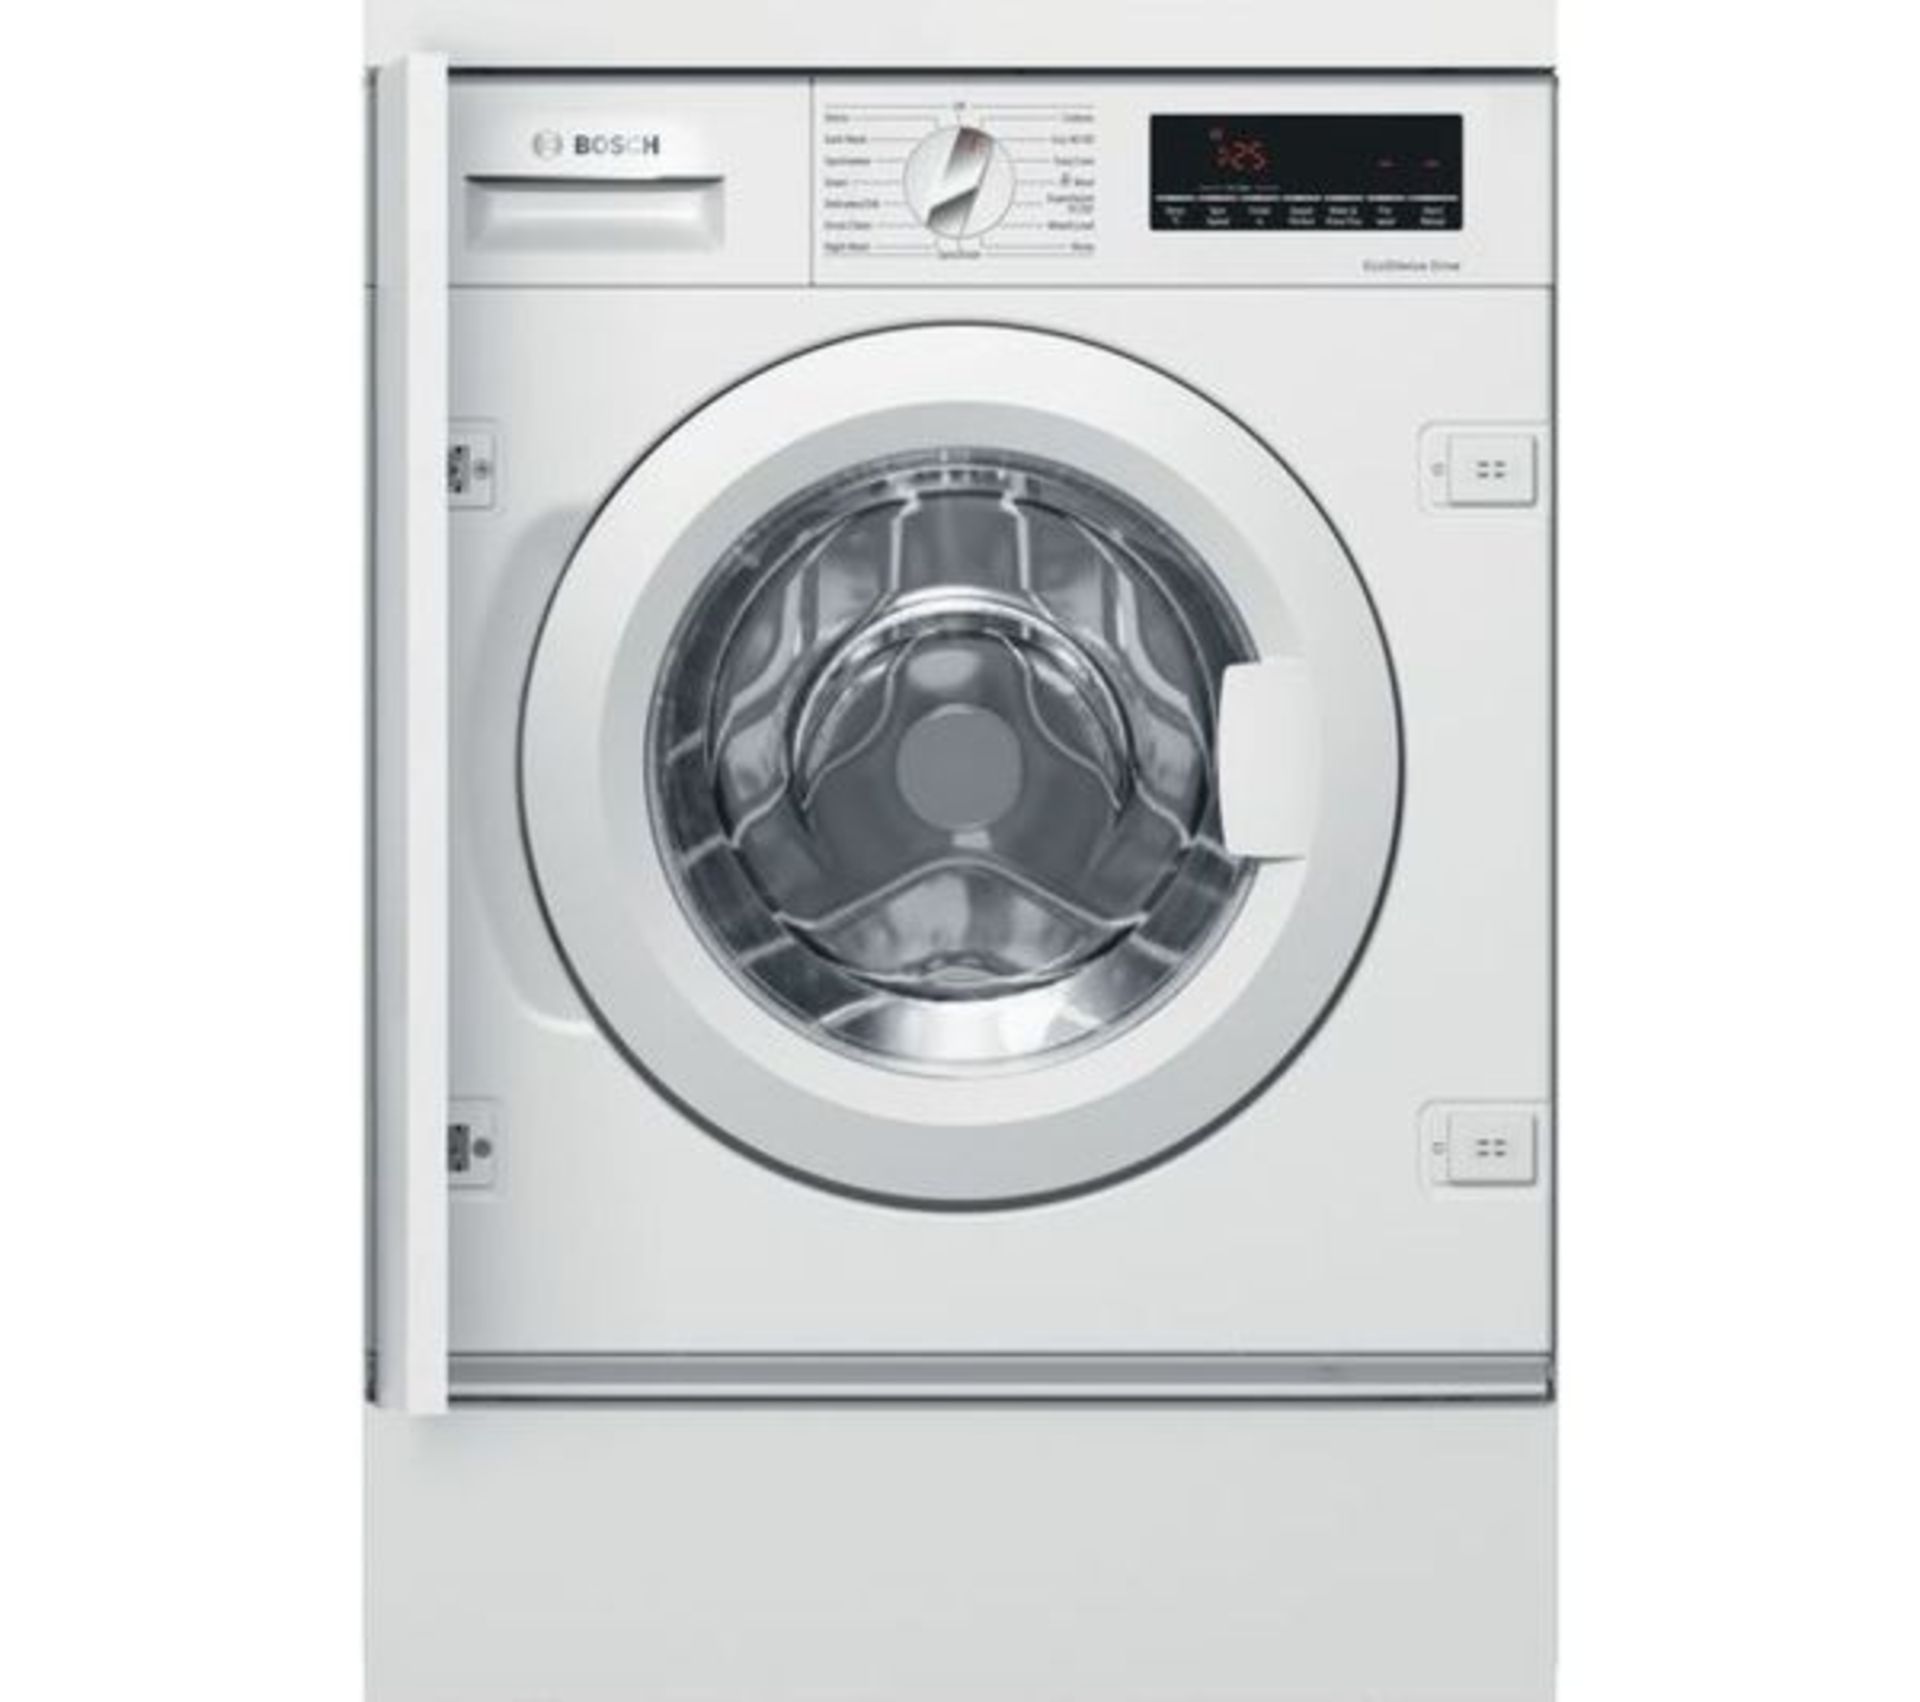 Bosch WIW28501GB Serie 8 Front Loading Washing Machine. - RRP £899.00. H/S. Capacity 8kg, 1400rpm,